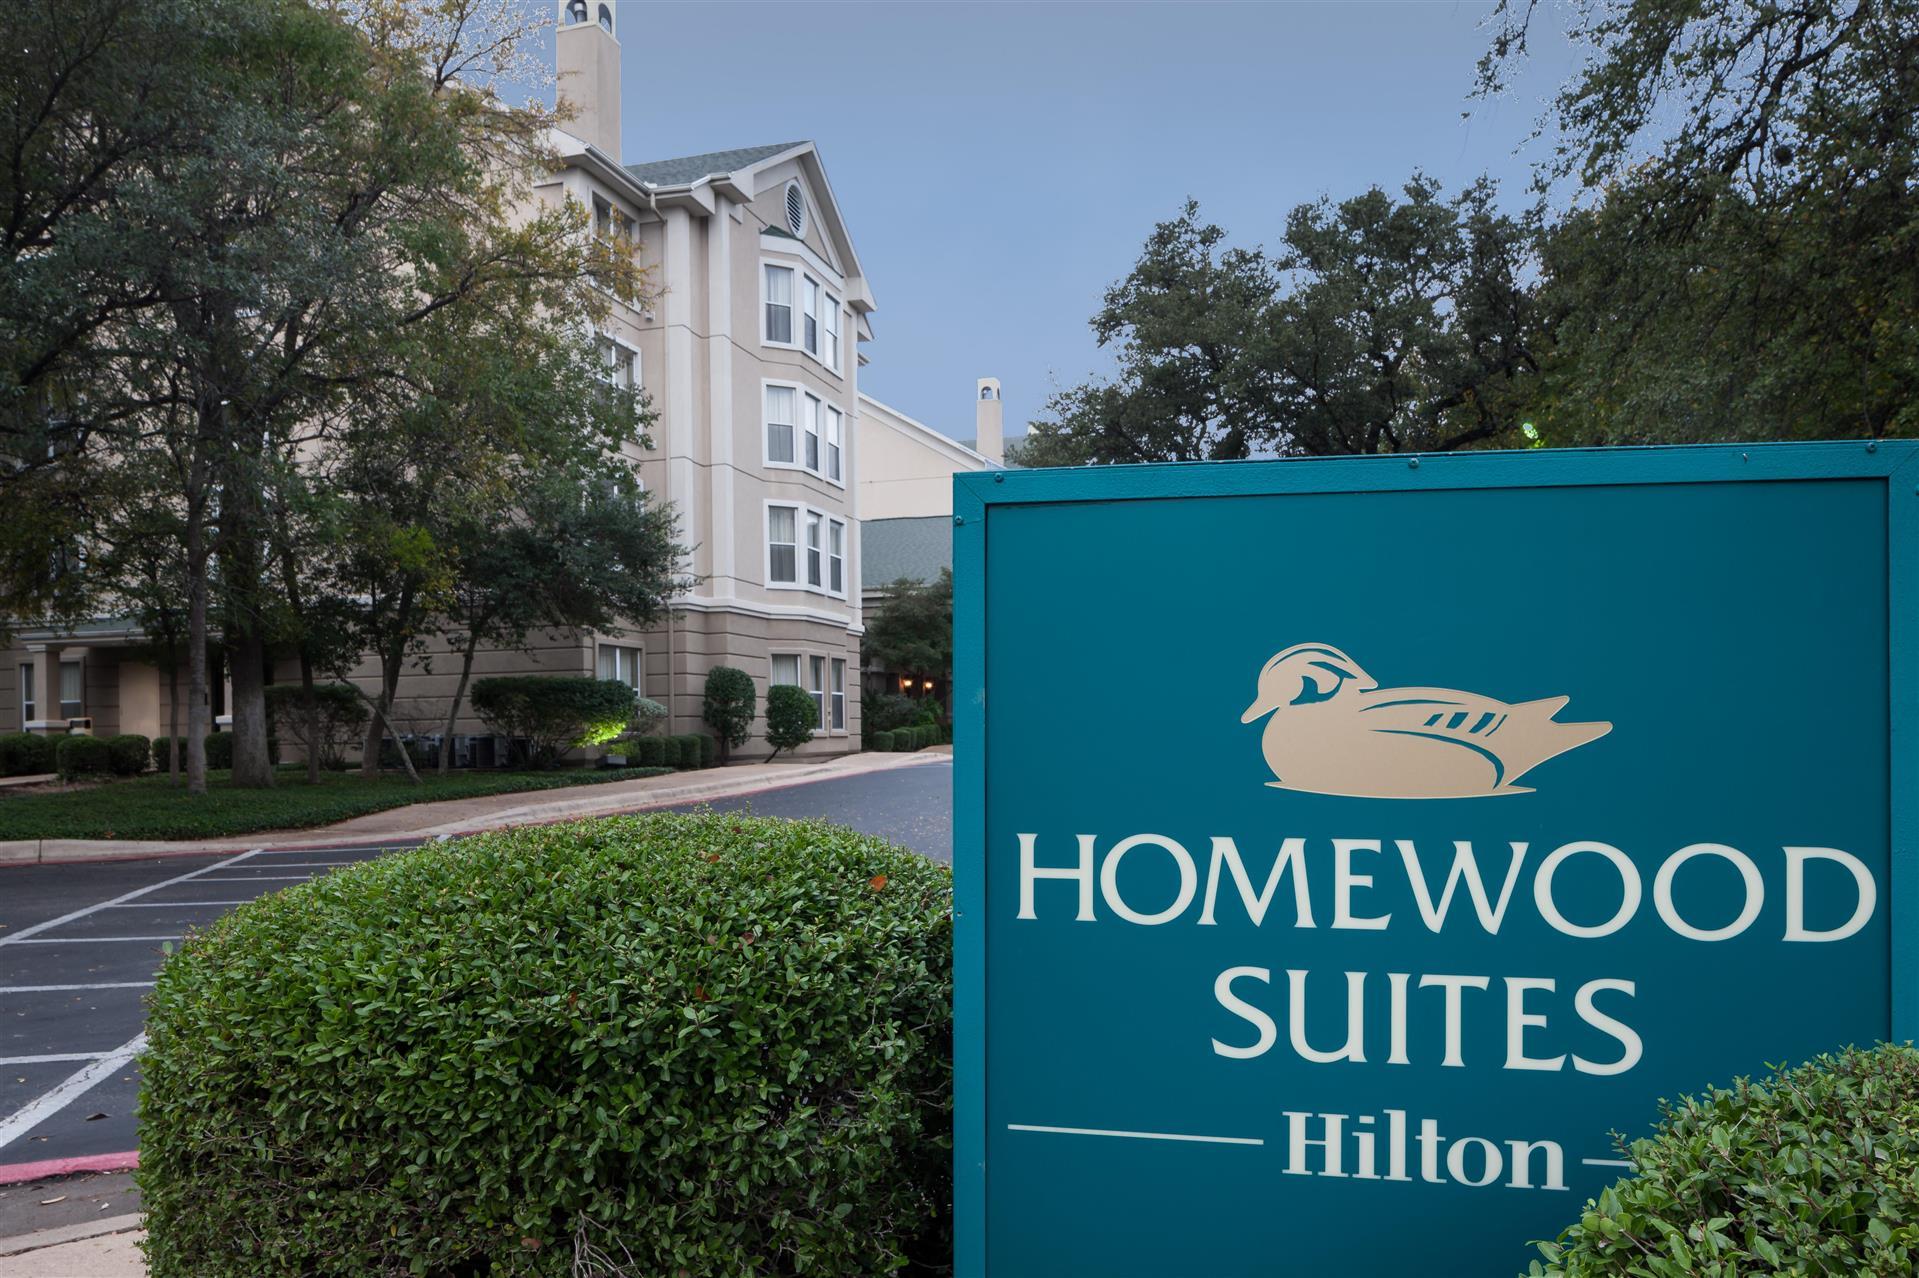 Homewood Suites by Hilton Austin NW near The Domain in Austin, TX